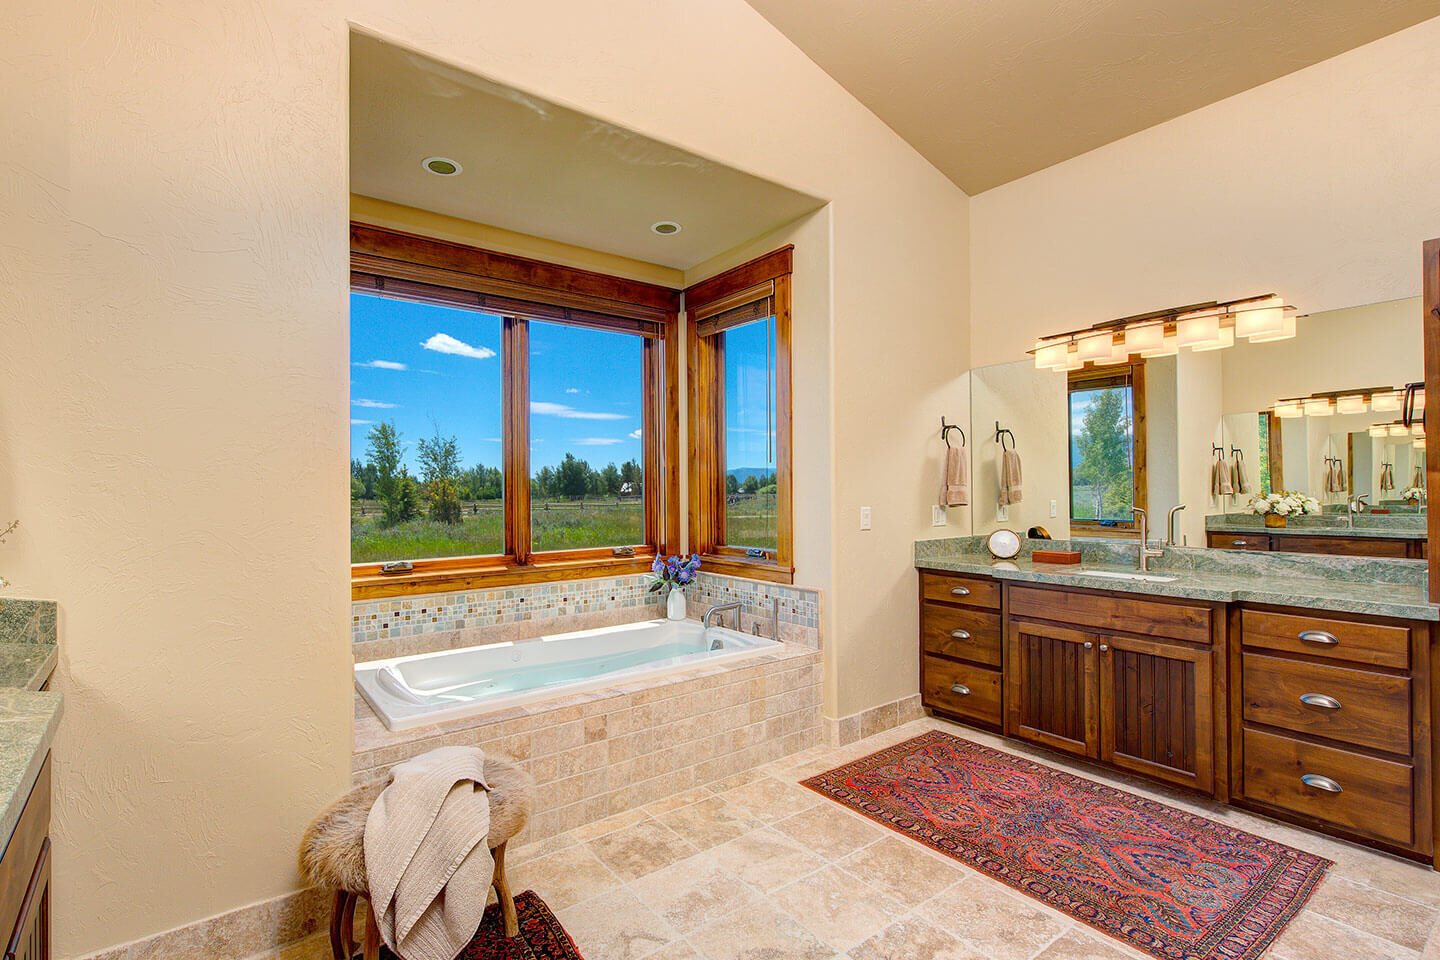 Bathroom with travertine stone and view